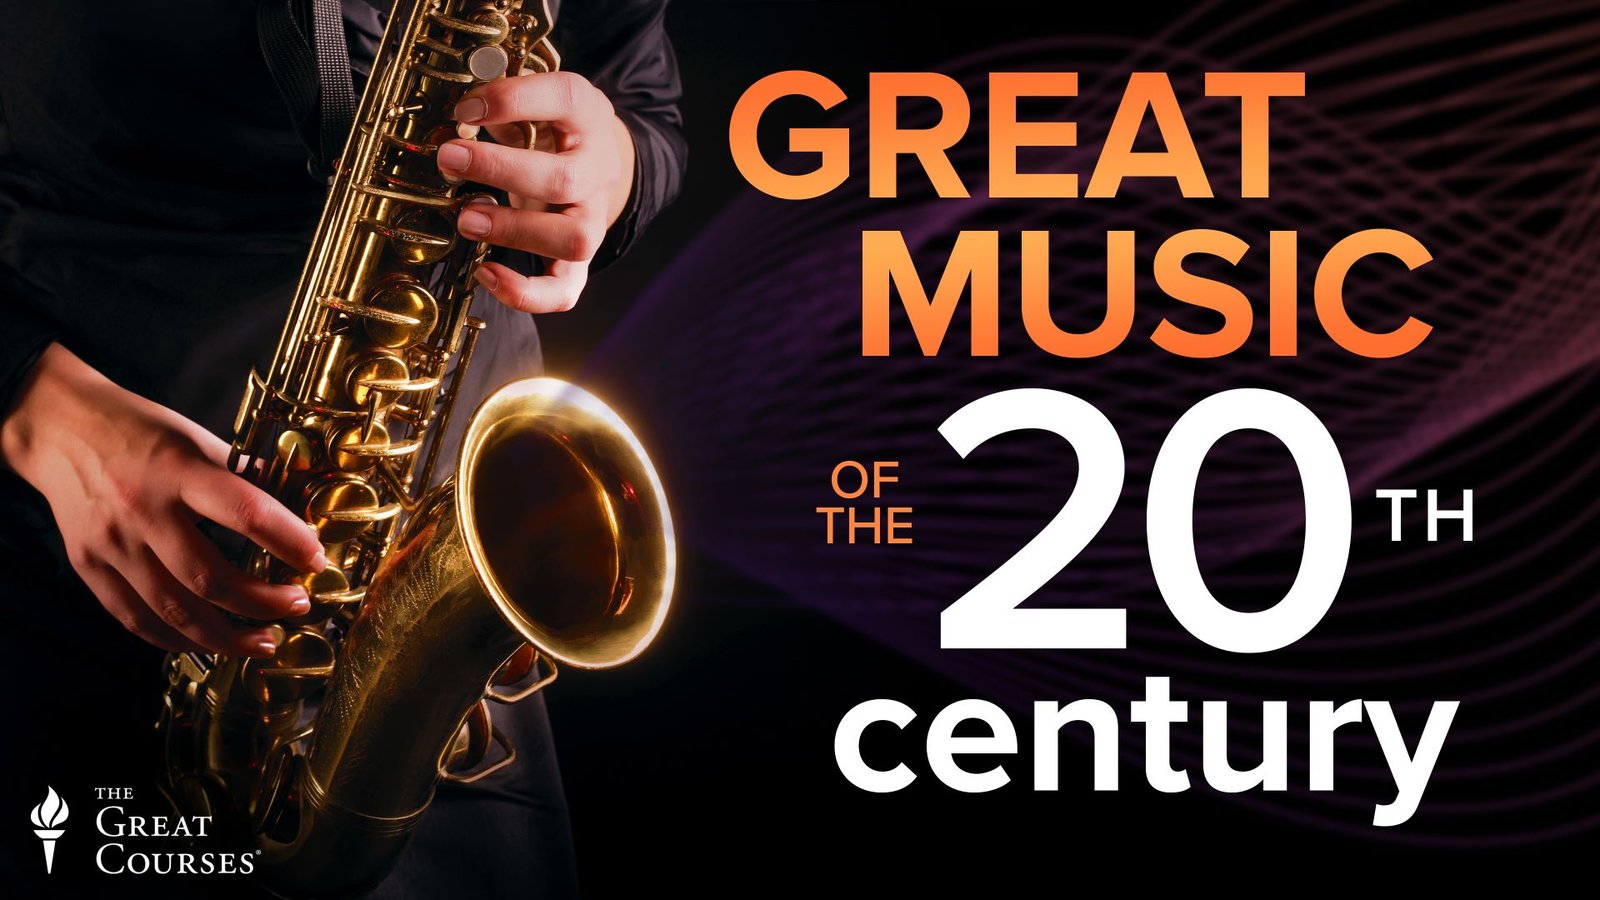 Great Music of the 20th Century